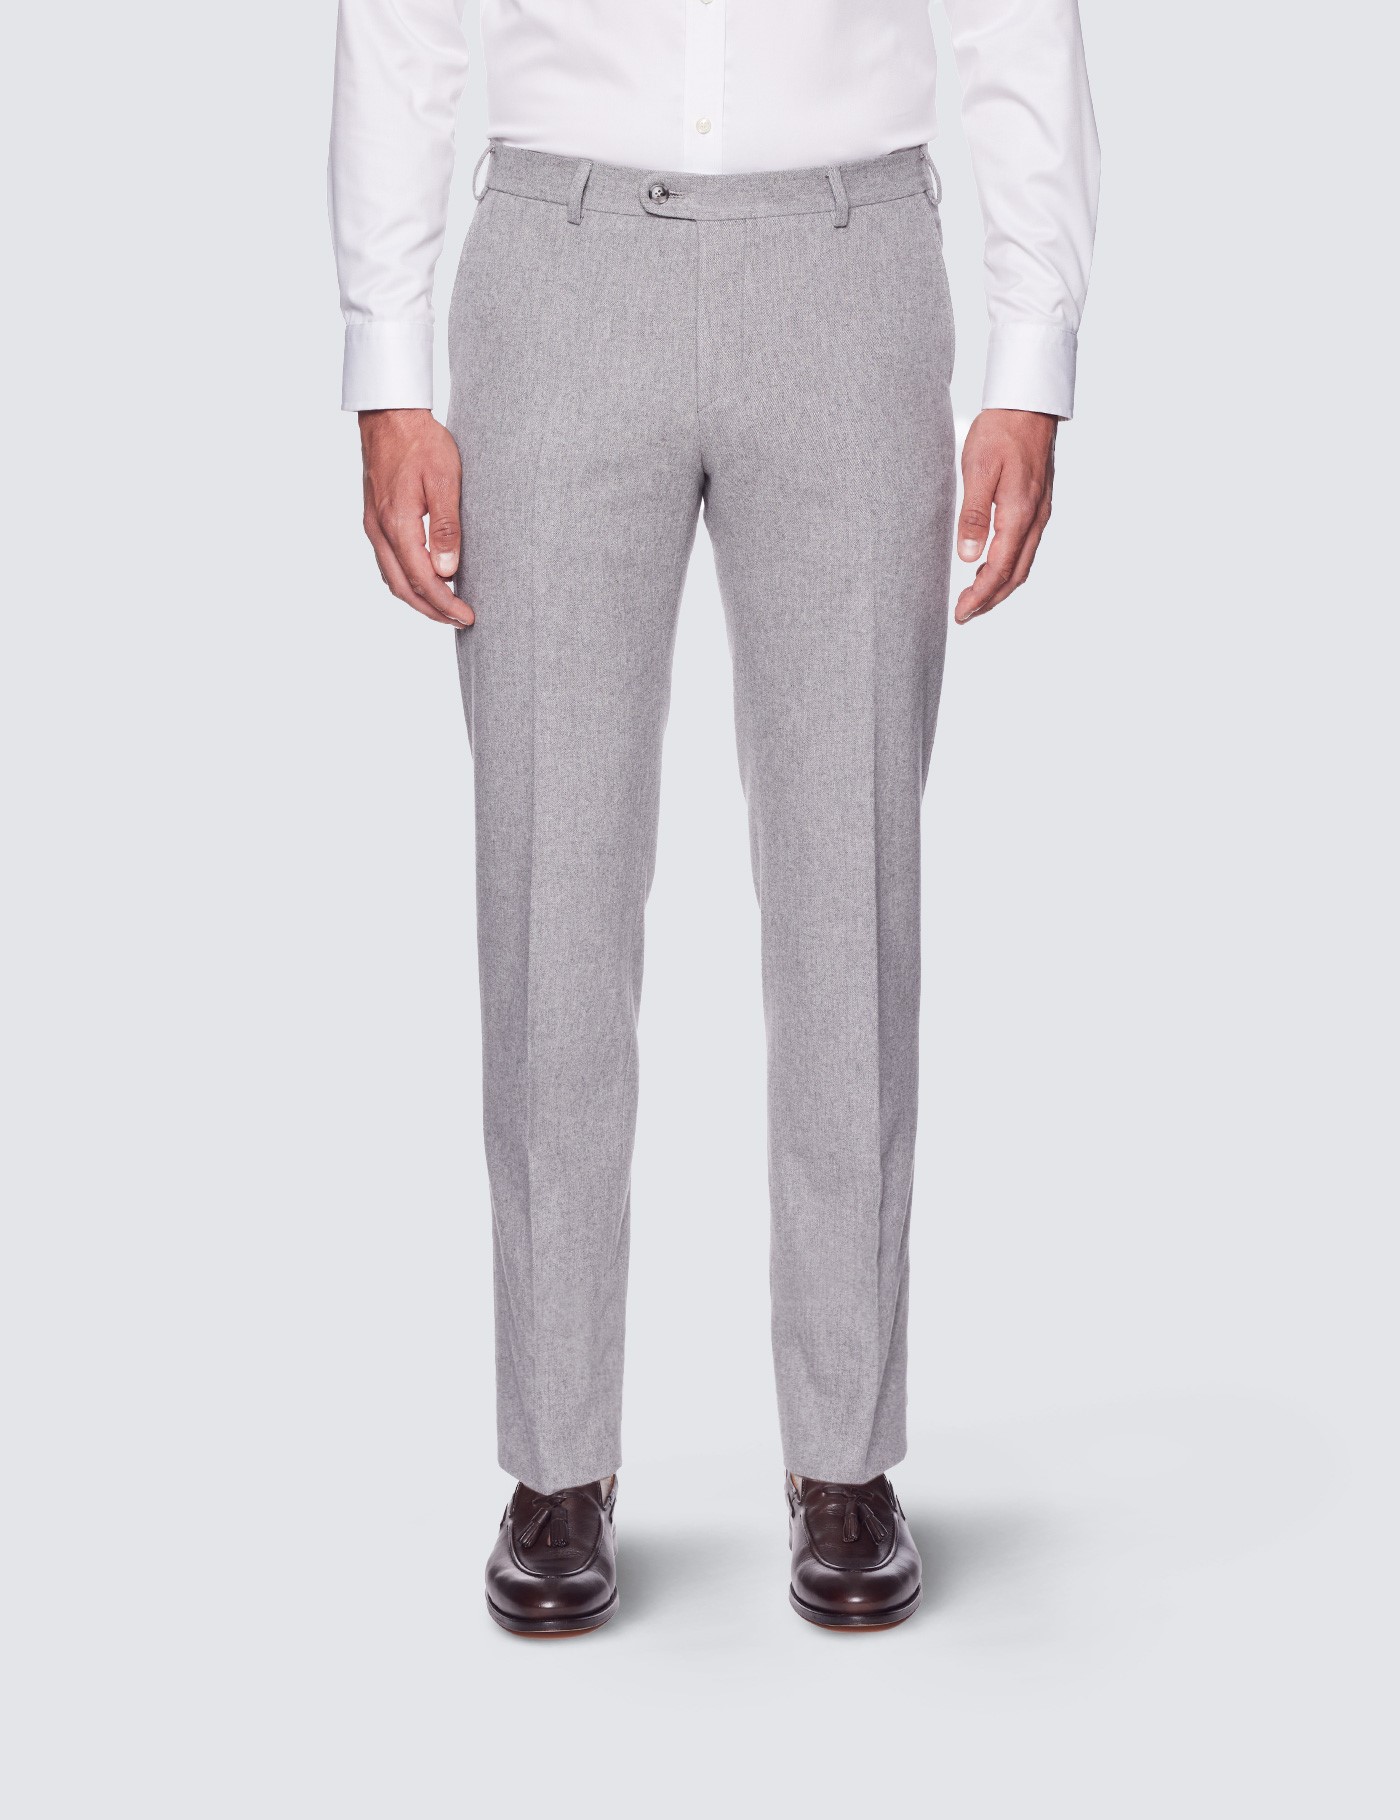 Men's Grey Twill Trousers - 1913 Collection | Hawes & Curtis